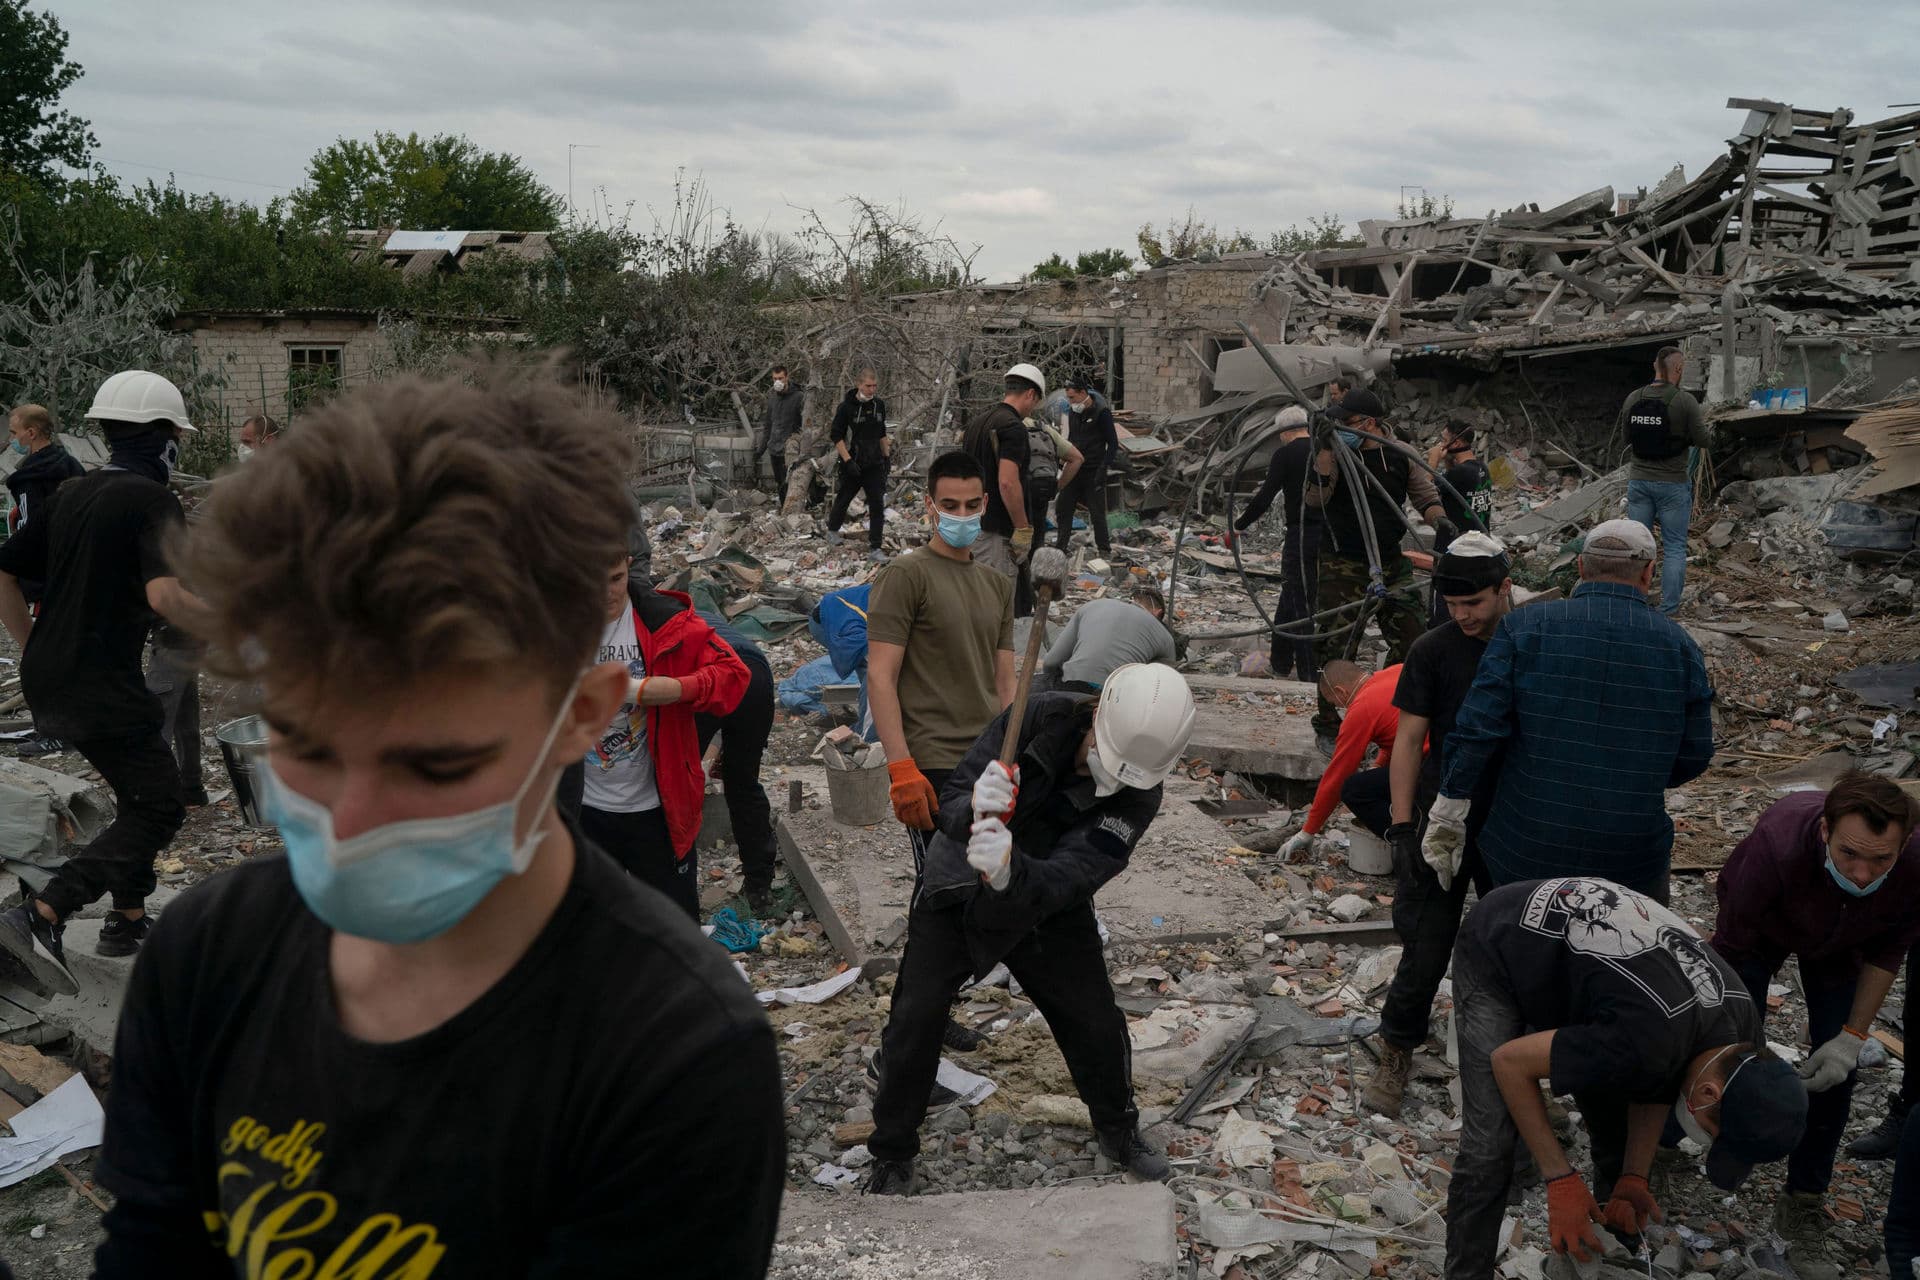 Volunteers work to clean the debris on a site where several houses were destroyed after a Russian attack at a residential area in Zaporizhzhia